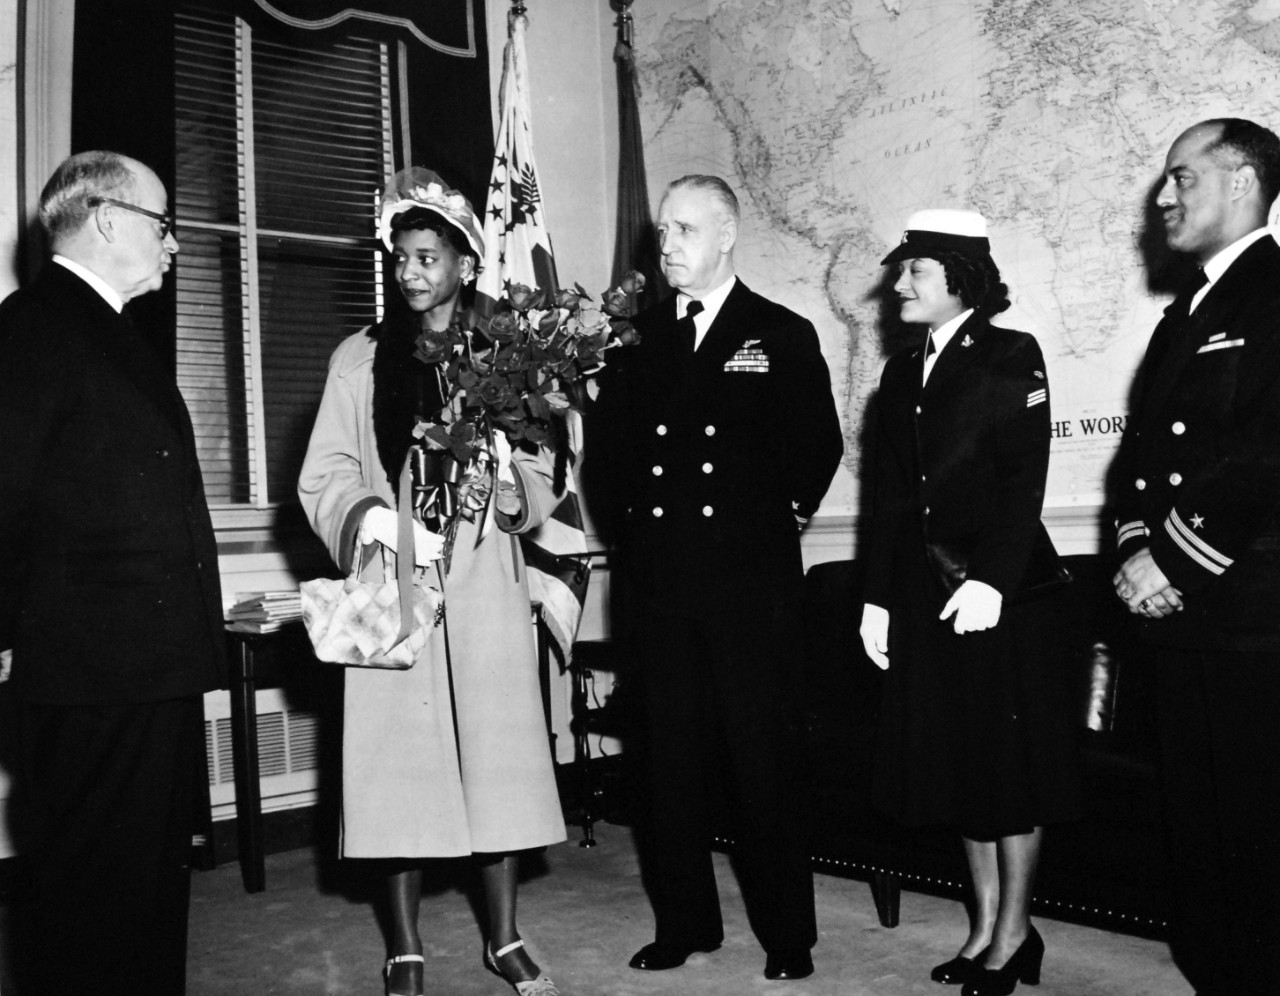 USN 708206:   Navy Aviator Receives Medal of Honor, April 1951.   In his office at the Pentagon, Secretary of the Navy Francis P. Matthews, (left), greeted Mrs. Daisy P. Brown, (second from left), widow of Ensign Jesse Leroy Brown, the first African American Naval Officer to lose his life in any United States war.   Left to right, are Secretary Matthews, Mrs. Brown, Rear Admiral Robert F. Hickey, USN, Chief of Information, Seaman First Class Clara Carroll, USN, and Lieutenant Dennis D. Nelson, USN.   For the attempted rescue of Ensign Brown, whose plane struck by anti-aircraft fire and trailing smoke, was forced down behind enemy lines in the Chosin Reservoir area of Korea on December 4, 1950.  Lieutenant Junior Grade Thomas J. Hudner, Jr., USN, received the Medal of Honor from President Harry S. Truman at a ceremony at the White House.   Photograph released April 13, 1951.  Official U.S. Navy Photograph, now in the collections of the National Archives.  